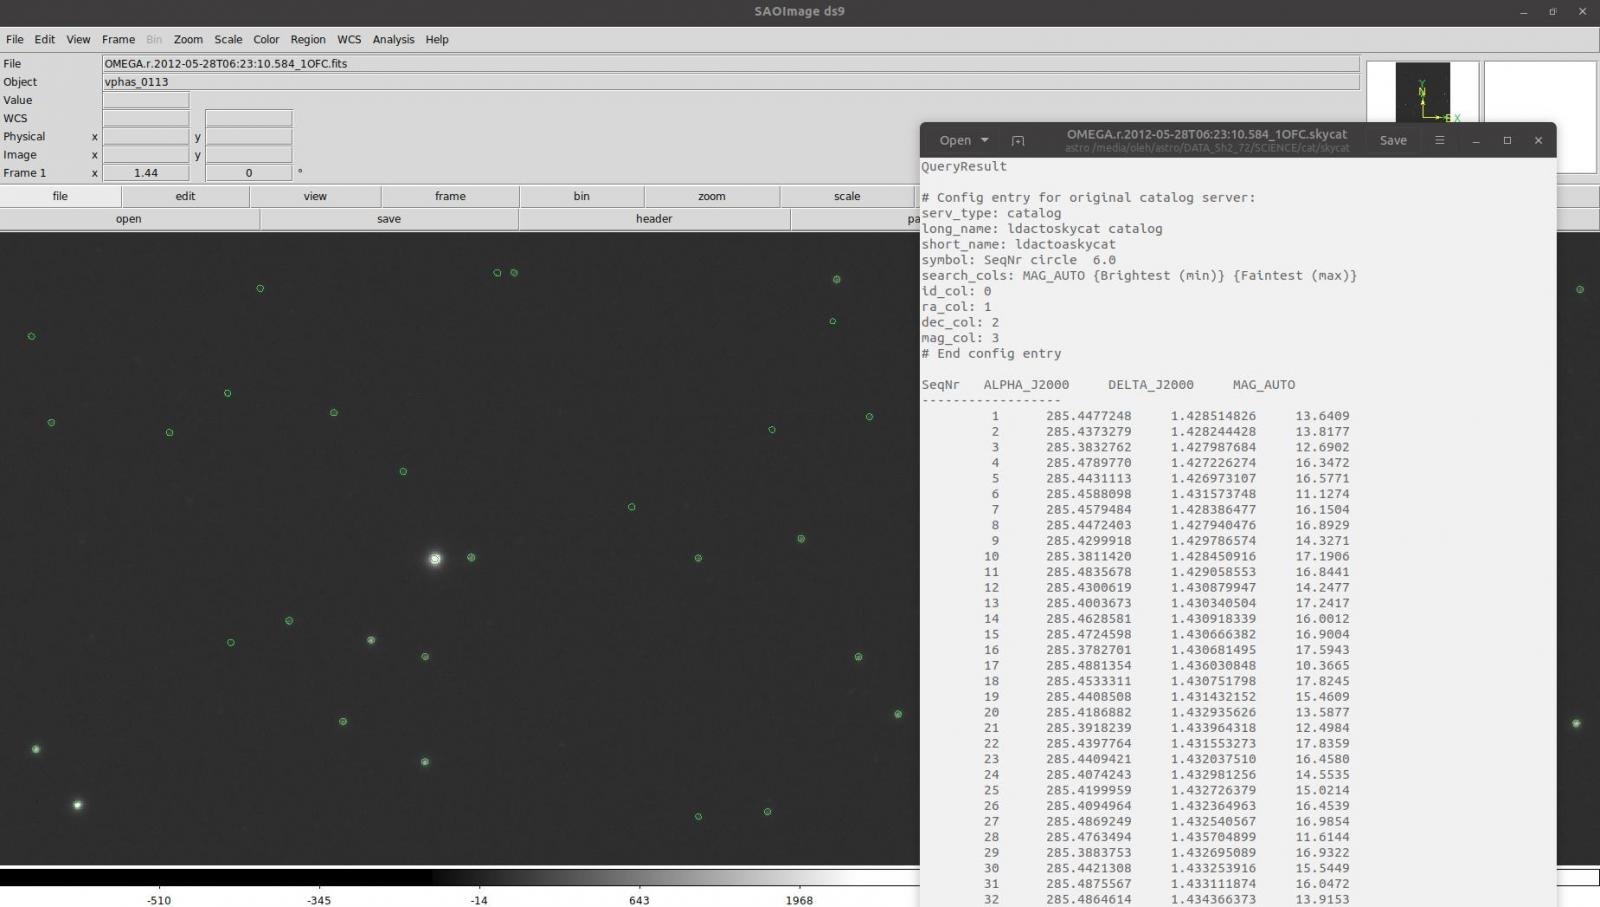 free astrometry software